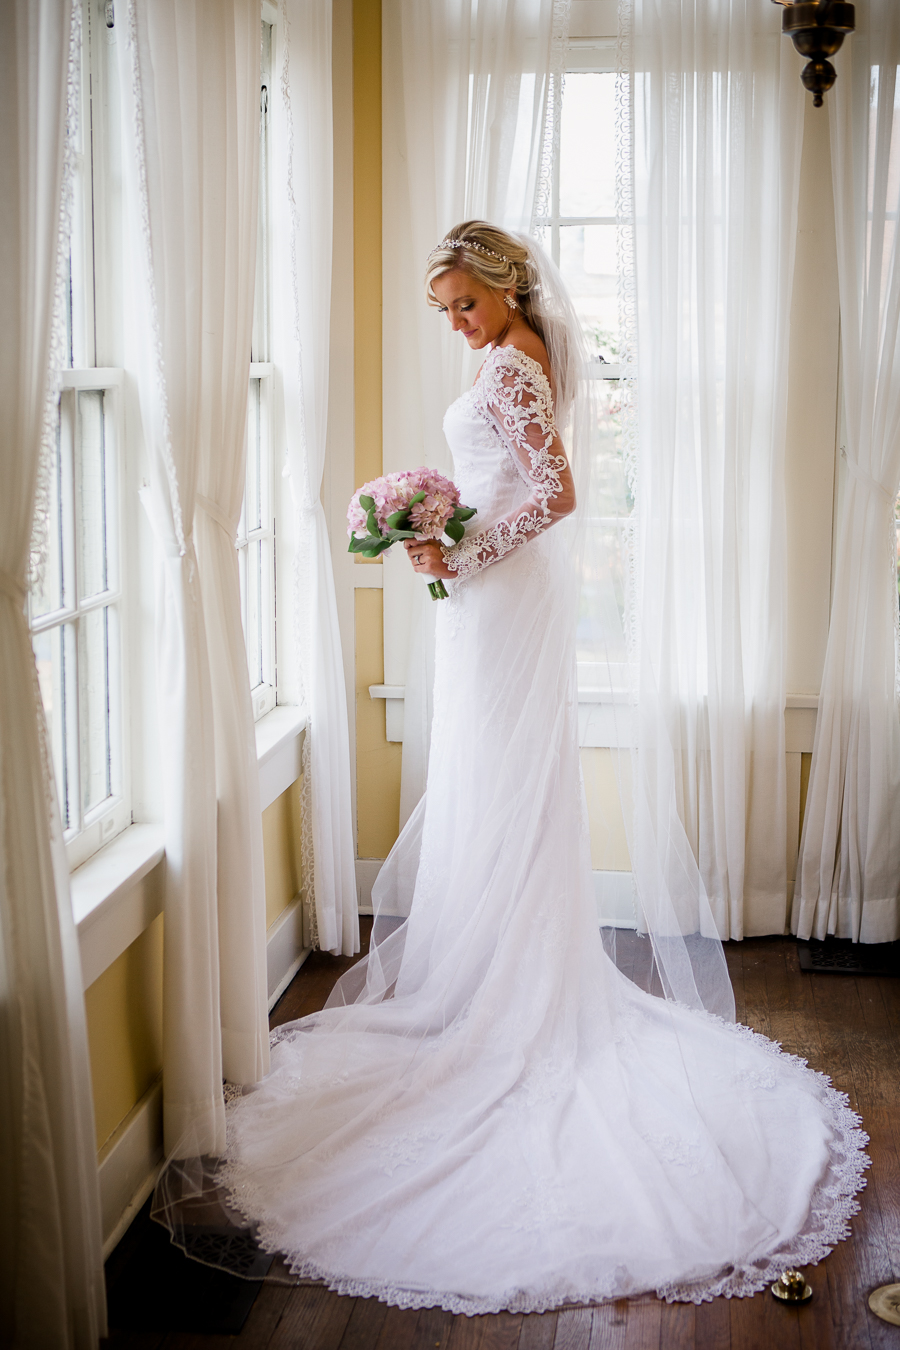 Twisting around in front of window at Historic Westwood by Knoxville Wedding Photographer, Amanda May Photos.